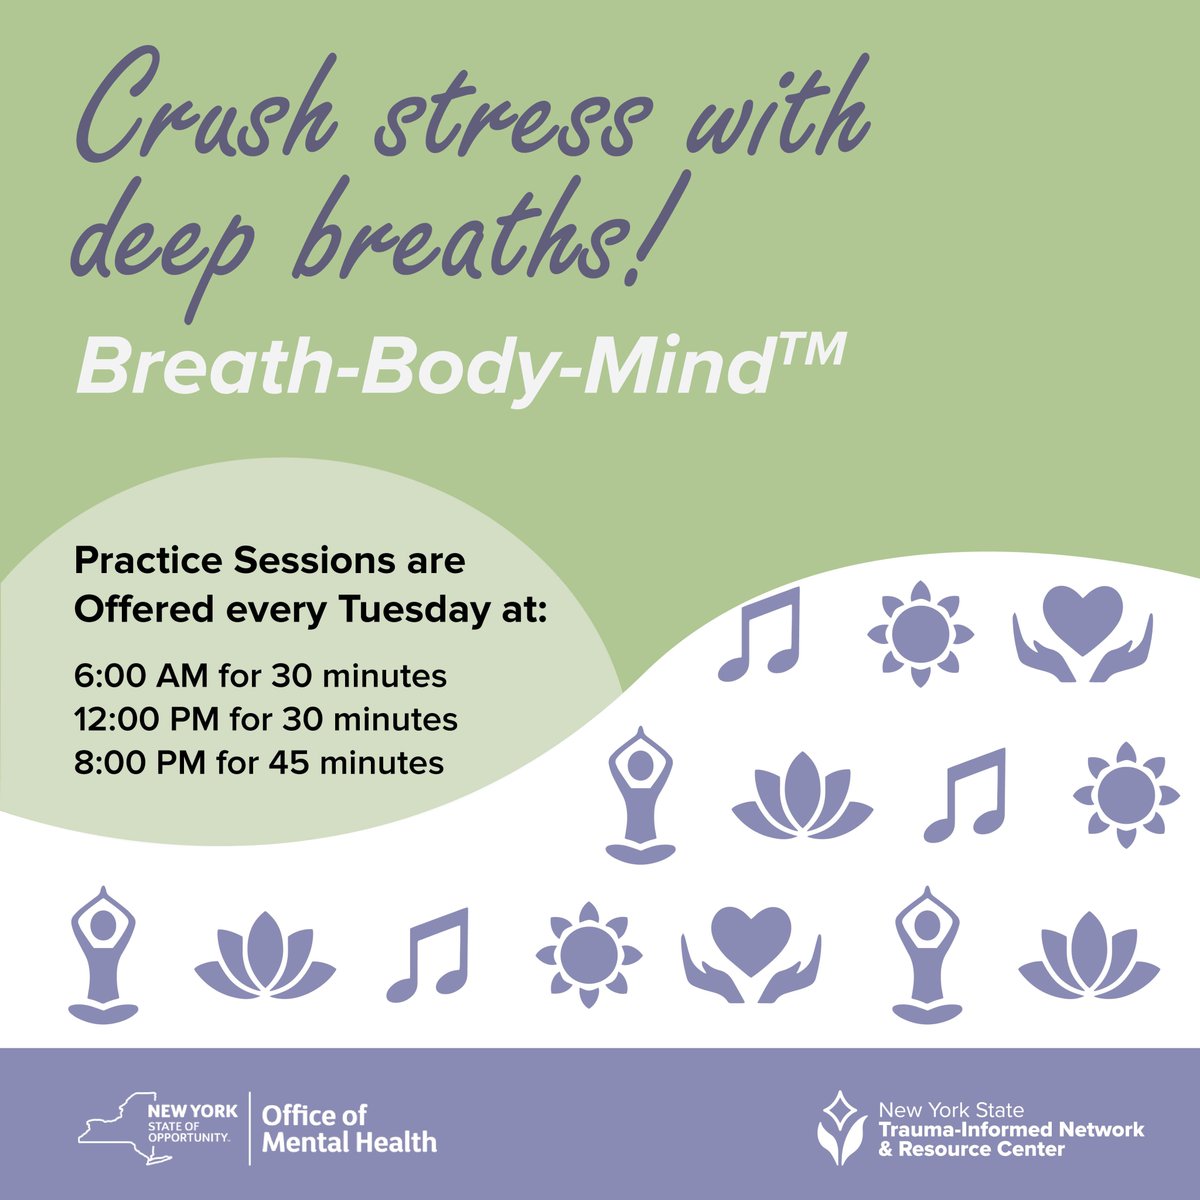 Wave goodbye to stress & breathe in tranquility. Join our free, online breathing sessions. Breath-Body-Mind™ practices help you manage & reduce stress. Sign up for our weekly sessions: shorturl.at/FNRS5 #breathbodymind #breathingbreak #stressfree #mentalhealthmatters